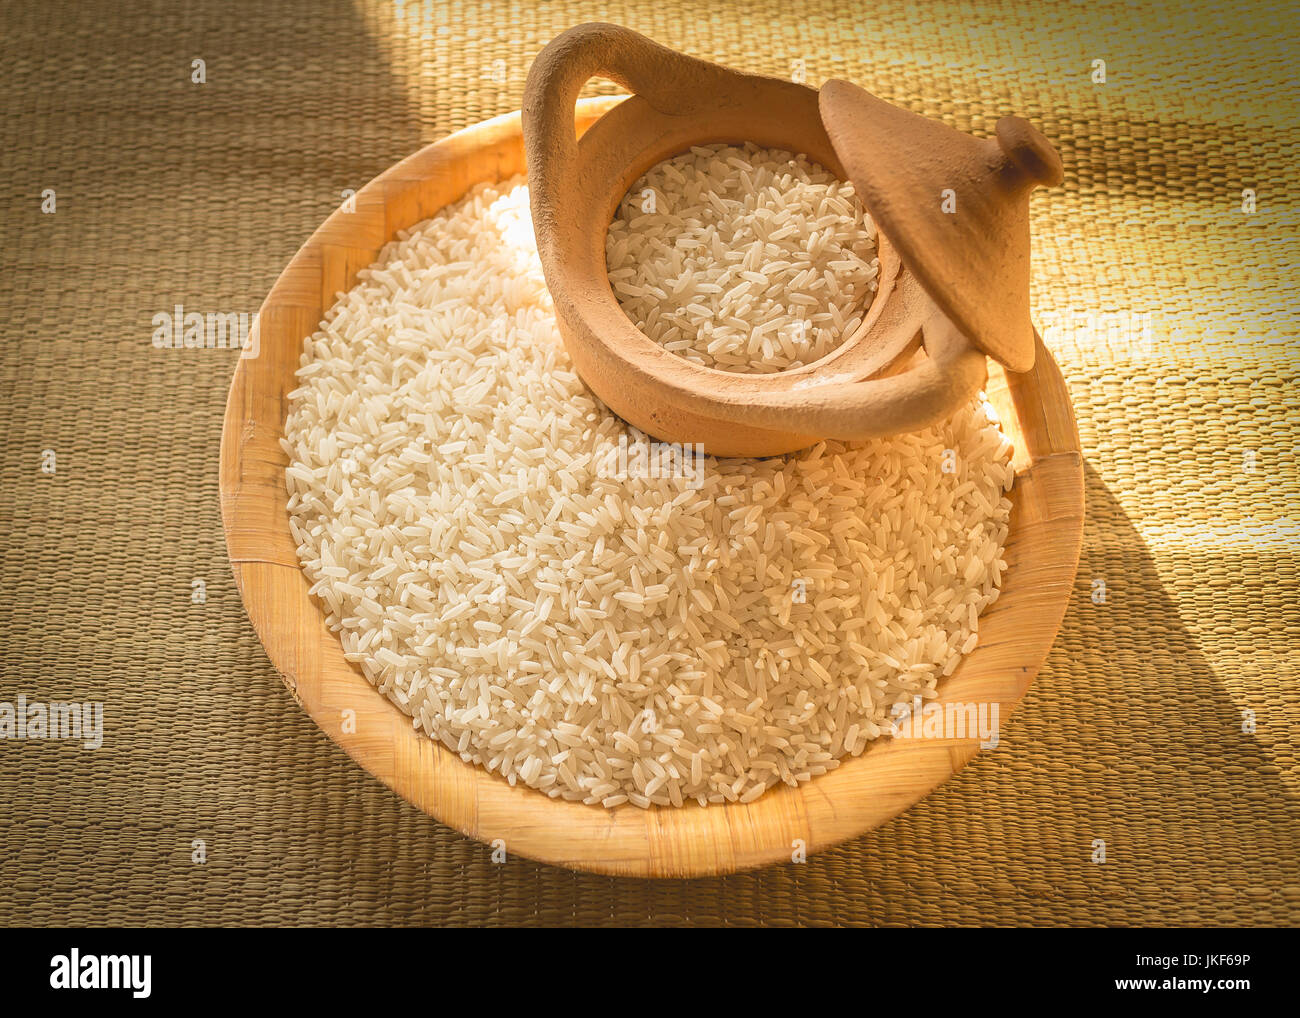 Small pile of long grain white rice over a wooden surface with natural illumination showing highlights and shadows rice Stock Photo